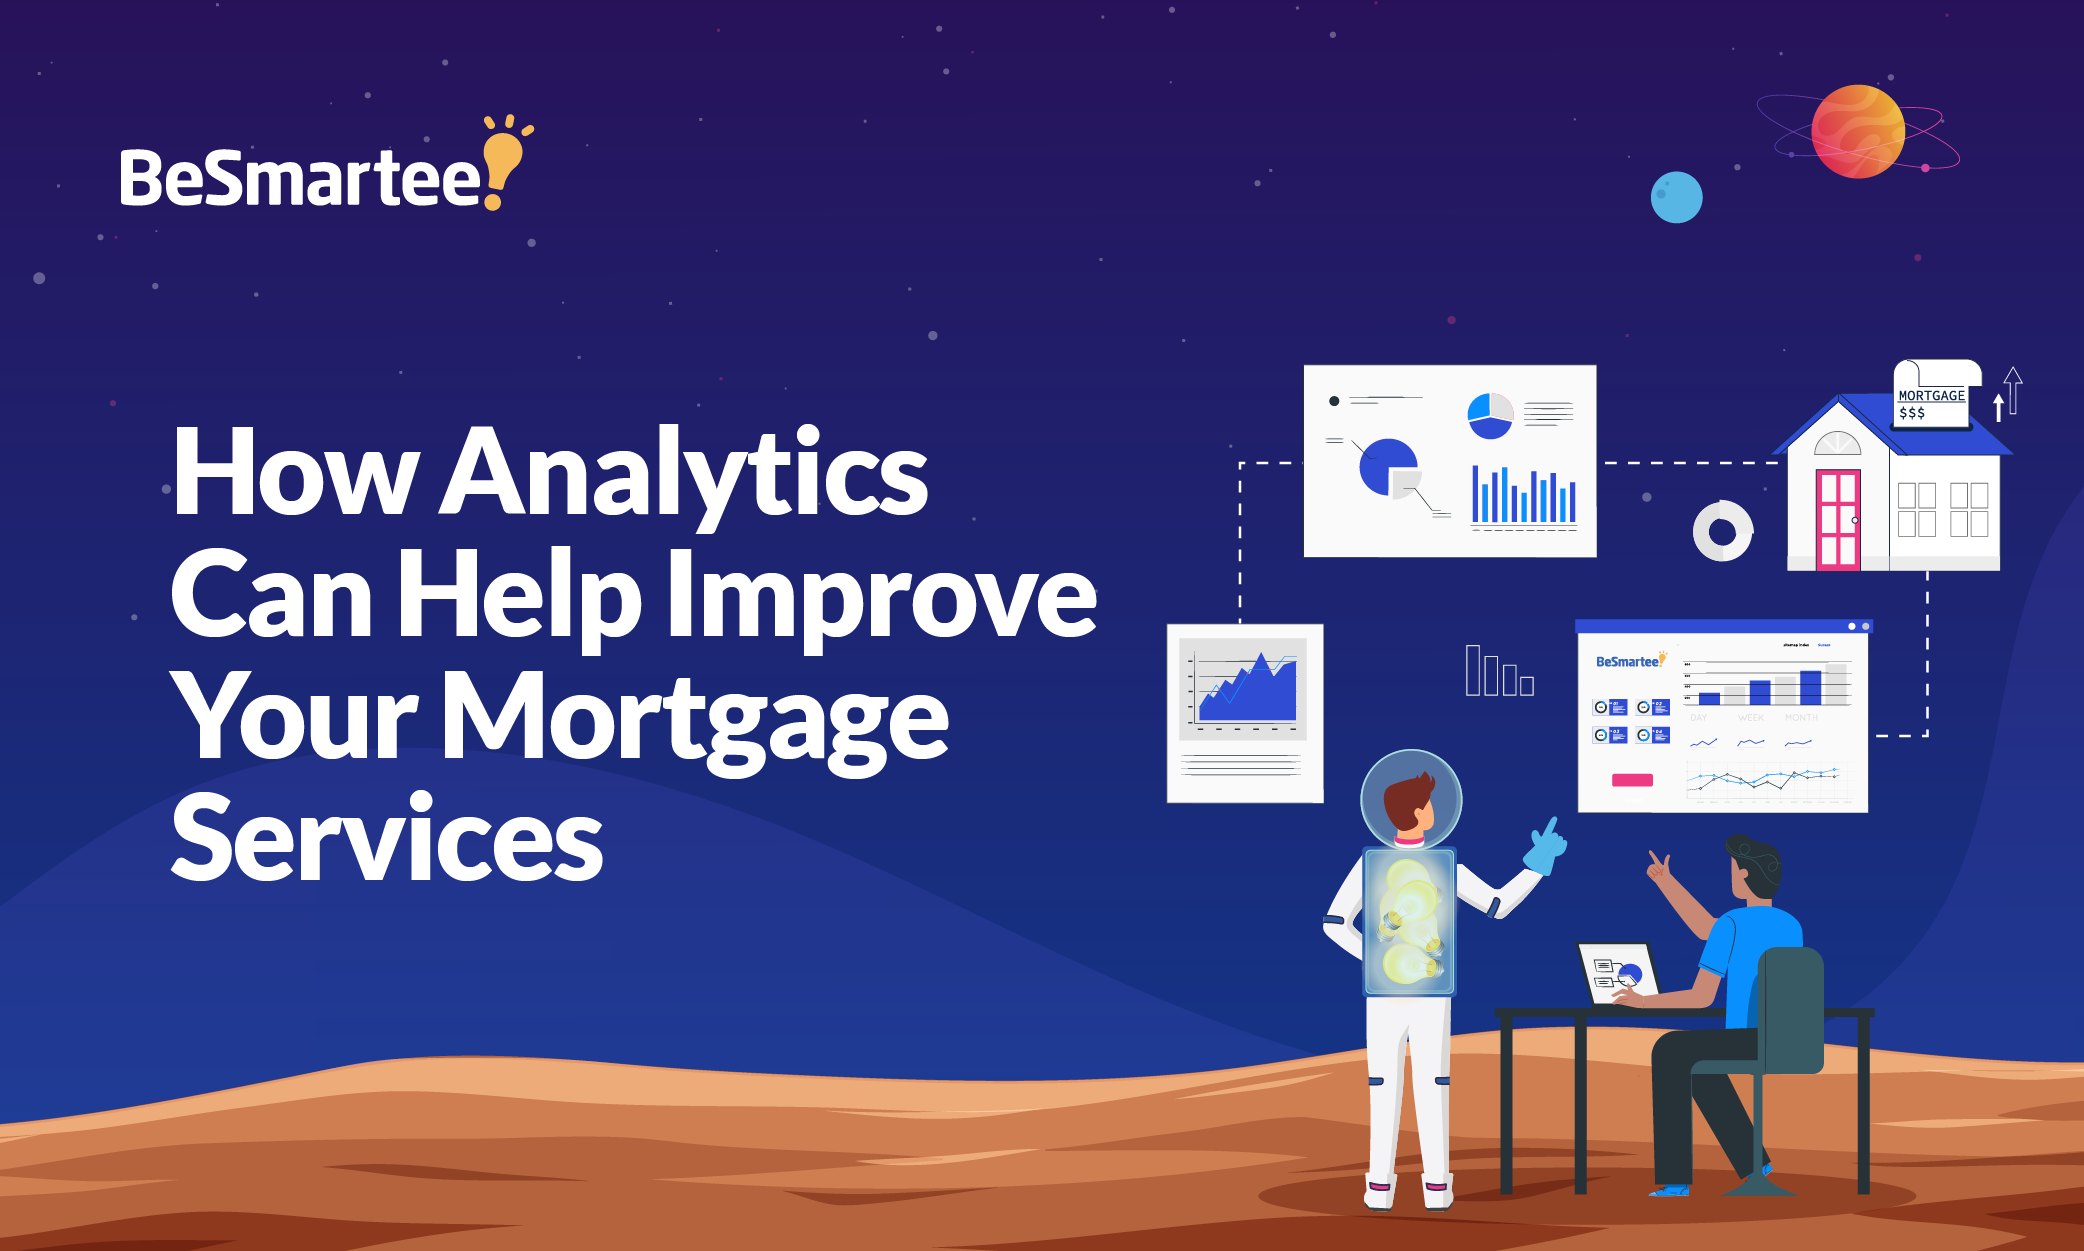 How Analytics Can Help Improve Your Mortgage Services BlogSpot